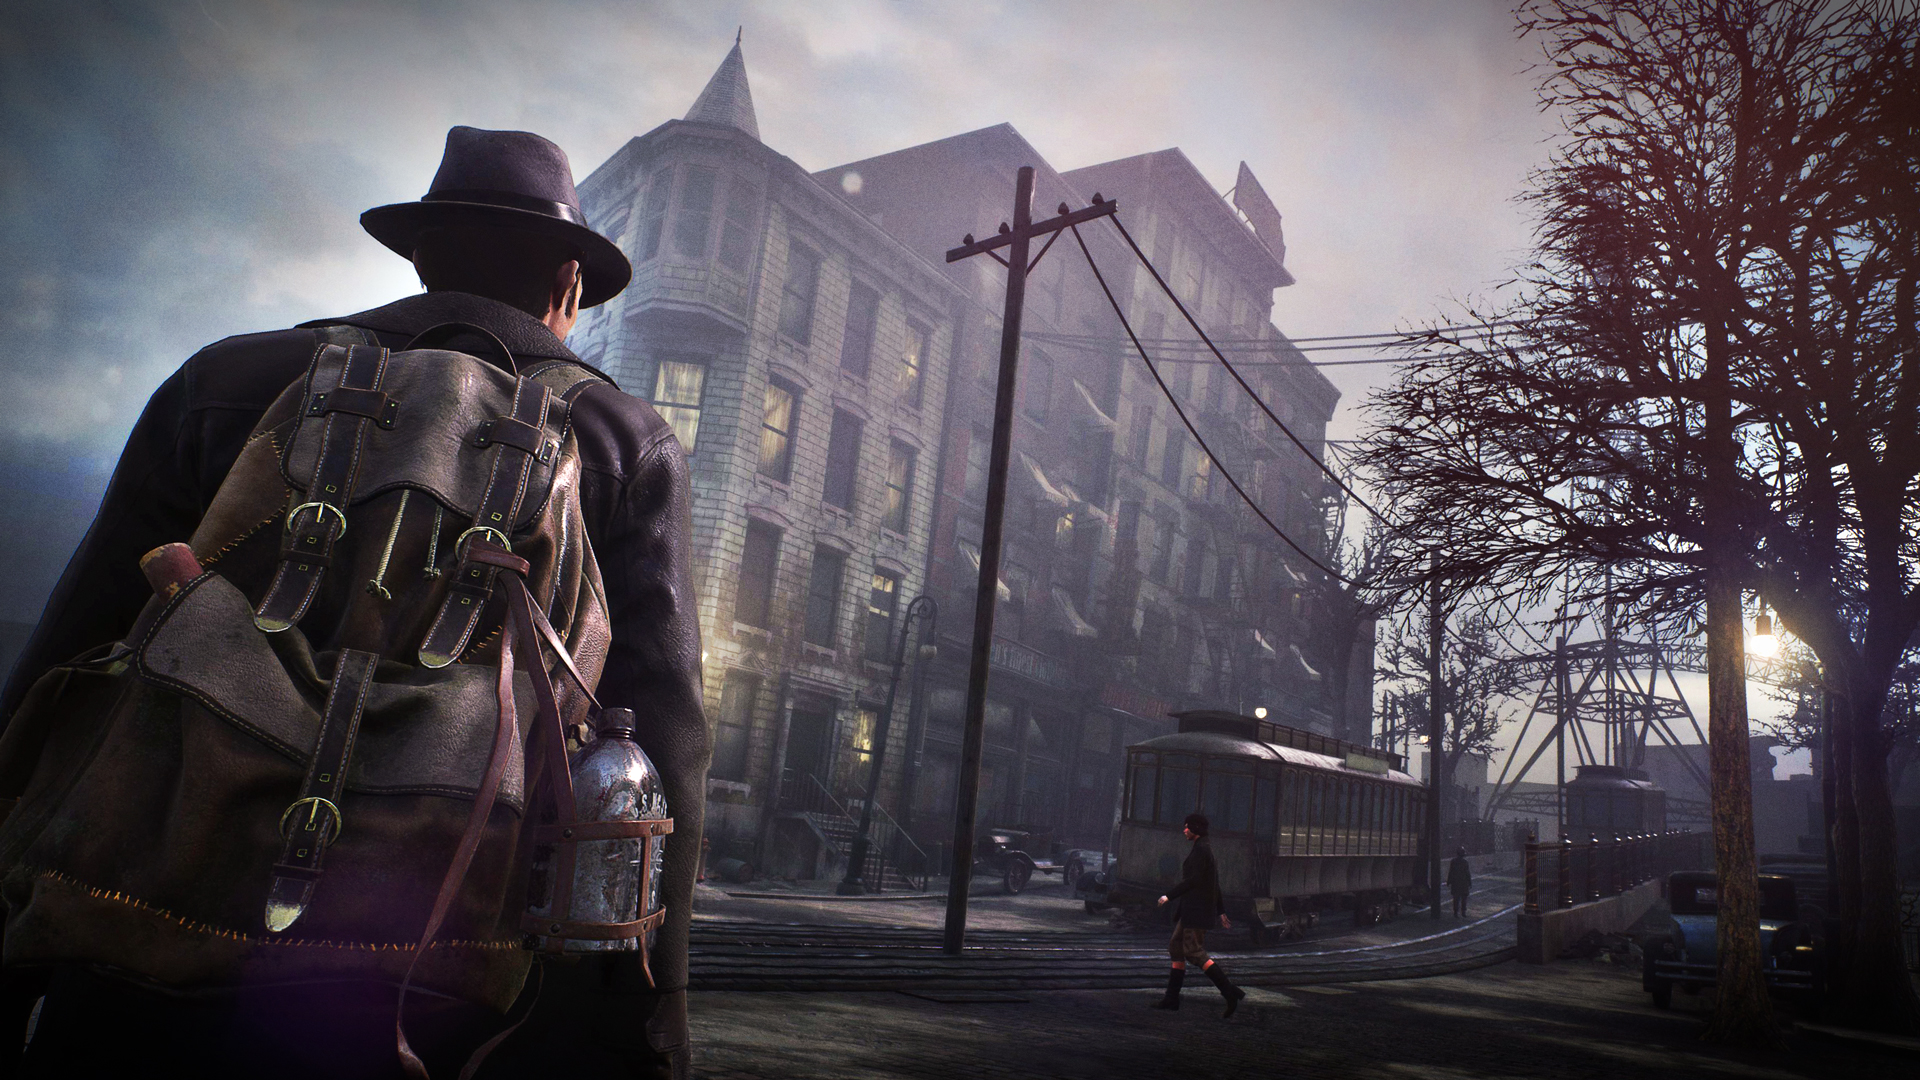 Challenge your bravery with the horror and detective game The Sinking City, on sale at 90% off.